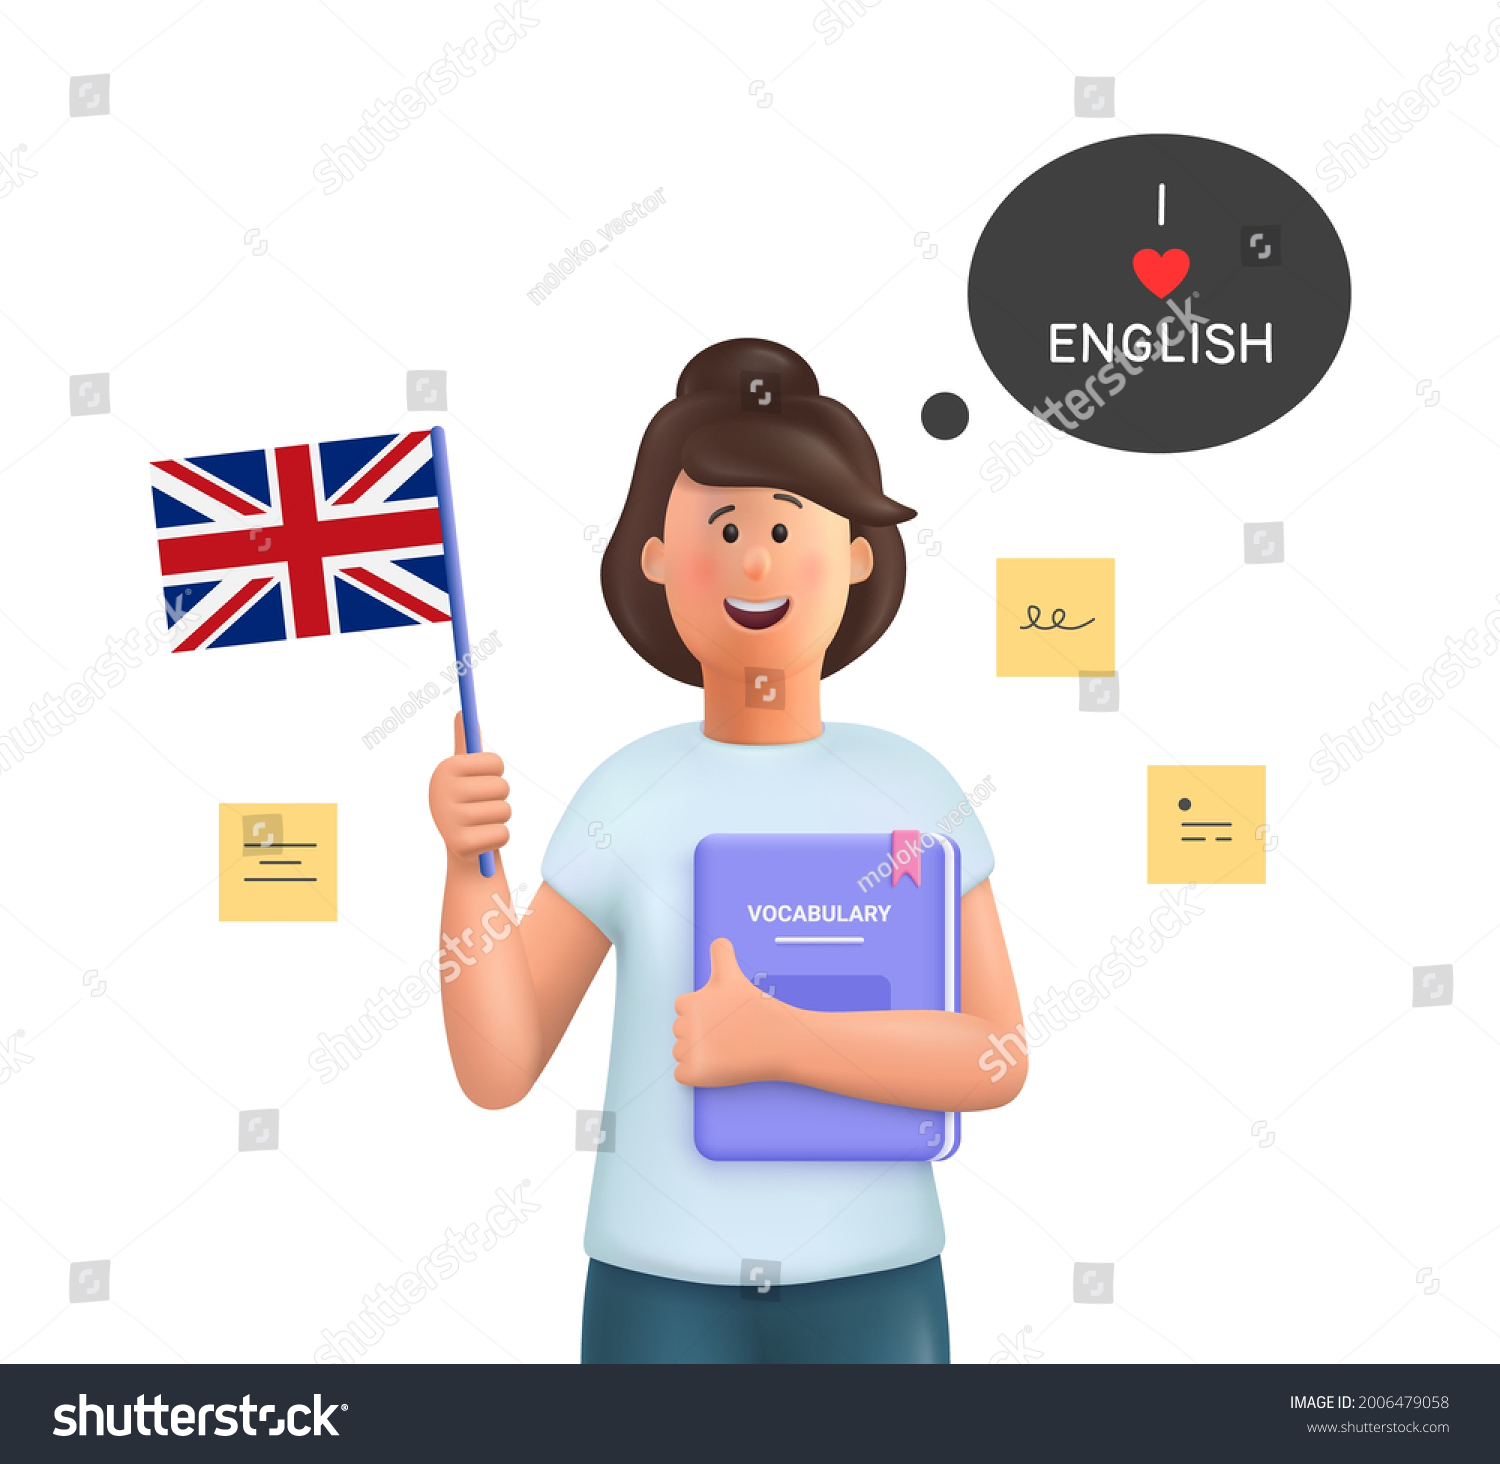 SVG of Young woman Jane studying english holding a dictionary and english flag. Learn English concept. 3d vector people character illustration. svg